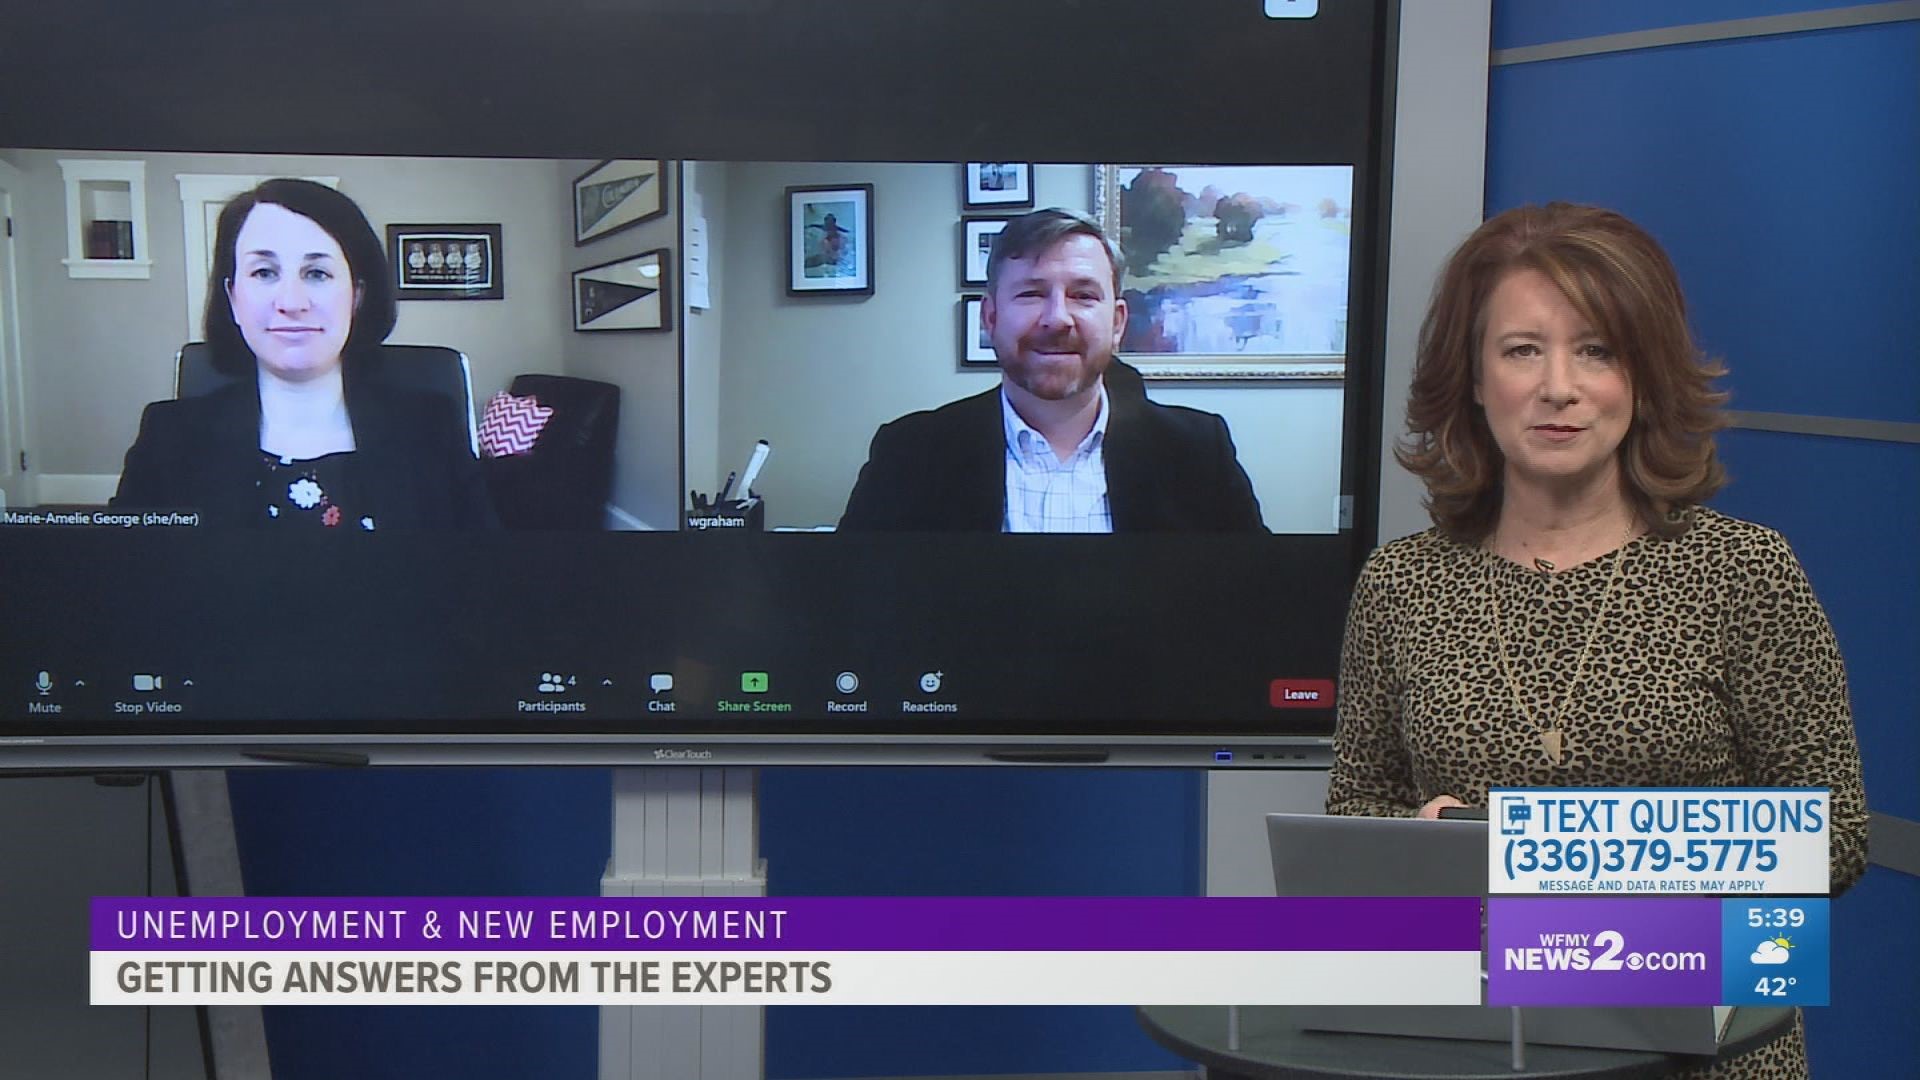 Wake Forest University law professor Marie-Amelie George and Will Graham from Graham Personnel Services answer your job and unemployment questions.